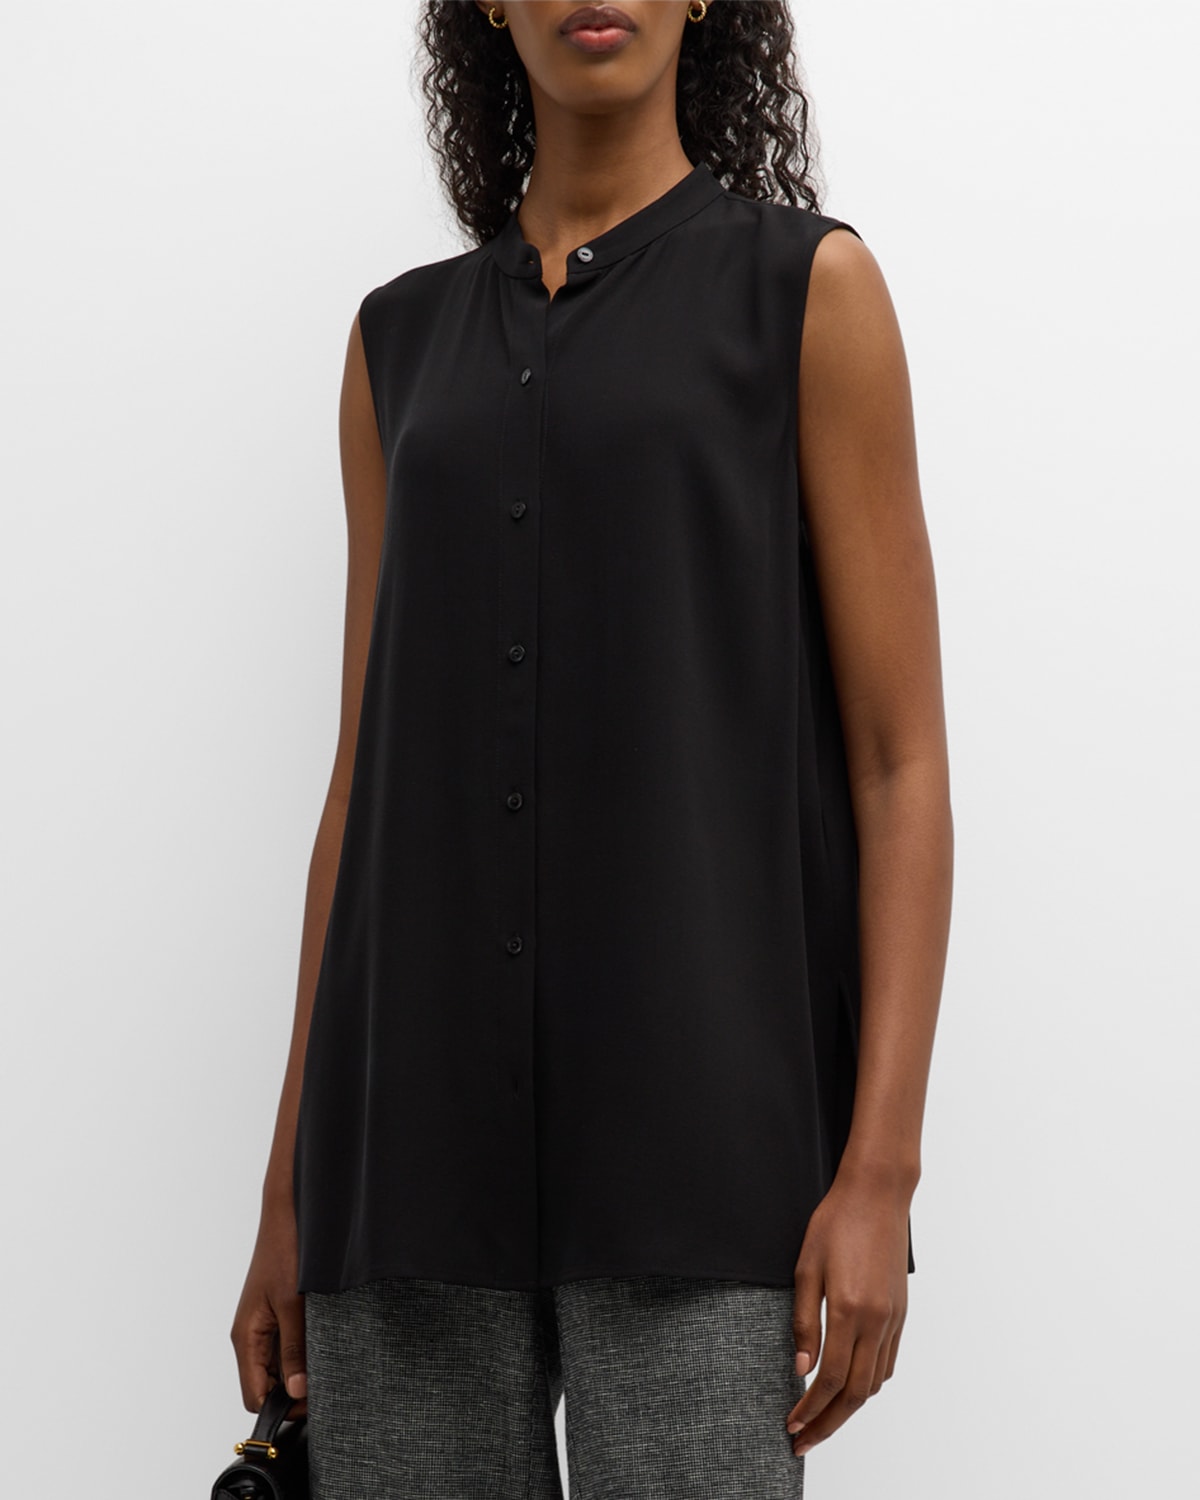 EILEEN FISHER SLEEVELESS BUTTON-DOWN GEORGETTE CREPE SHIRT